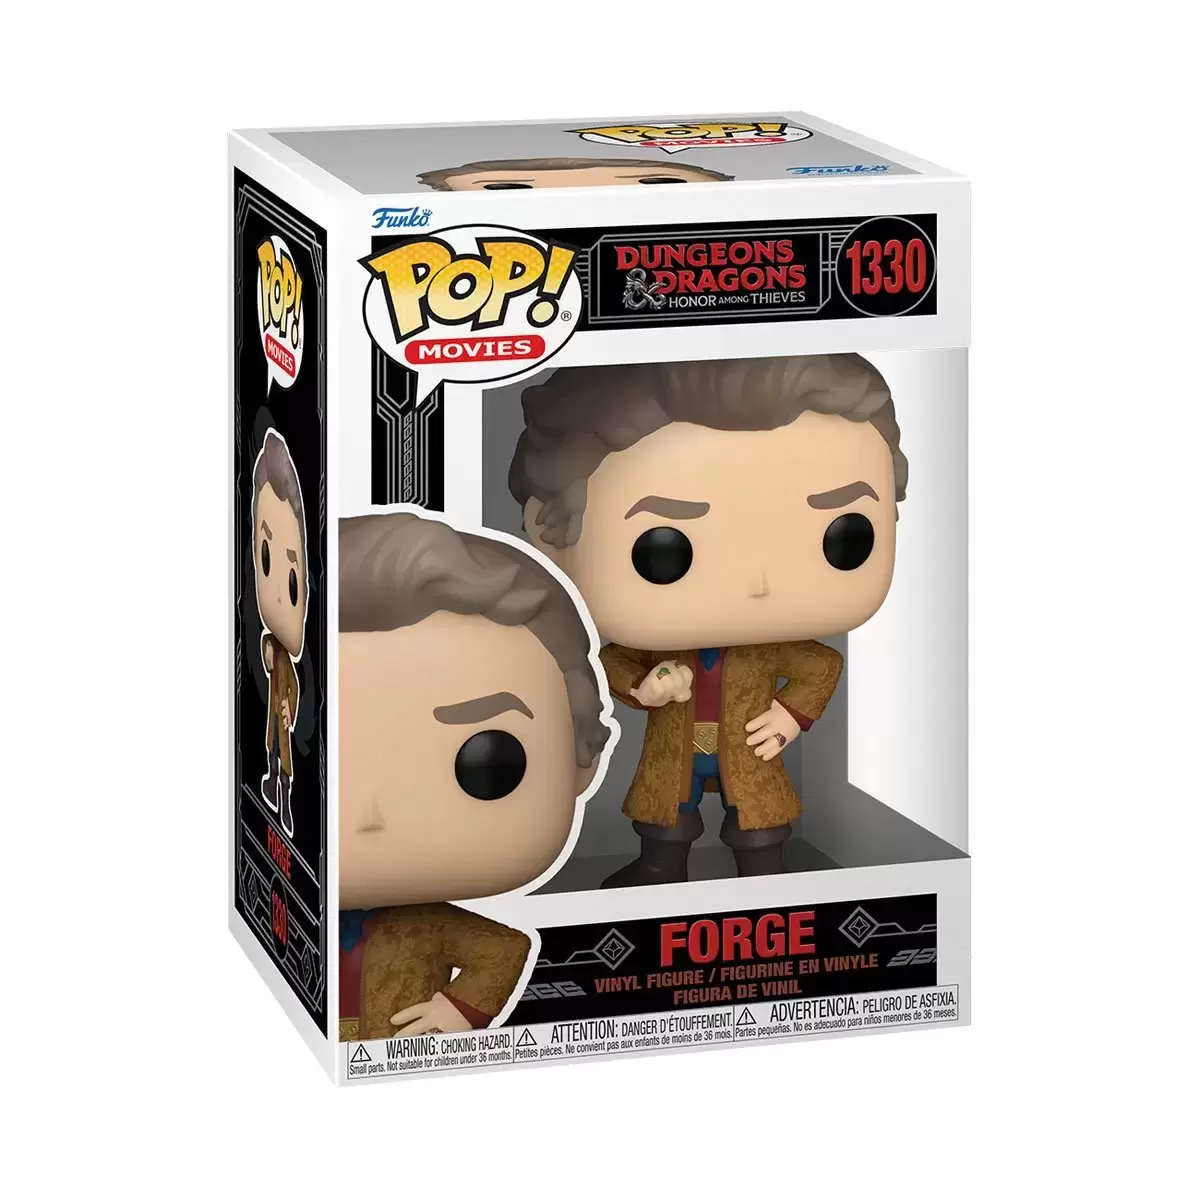 POP! Movies - Dungeons & Dragons - Forge